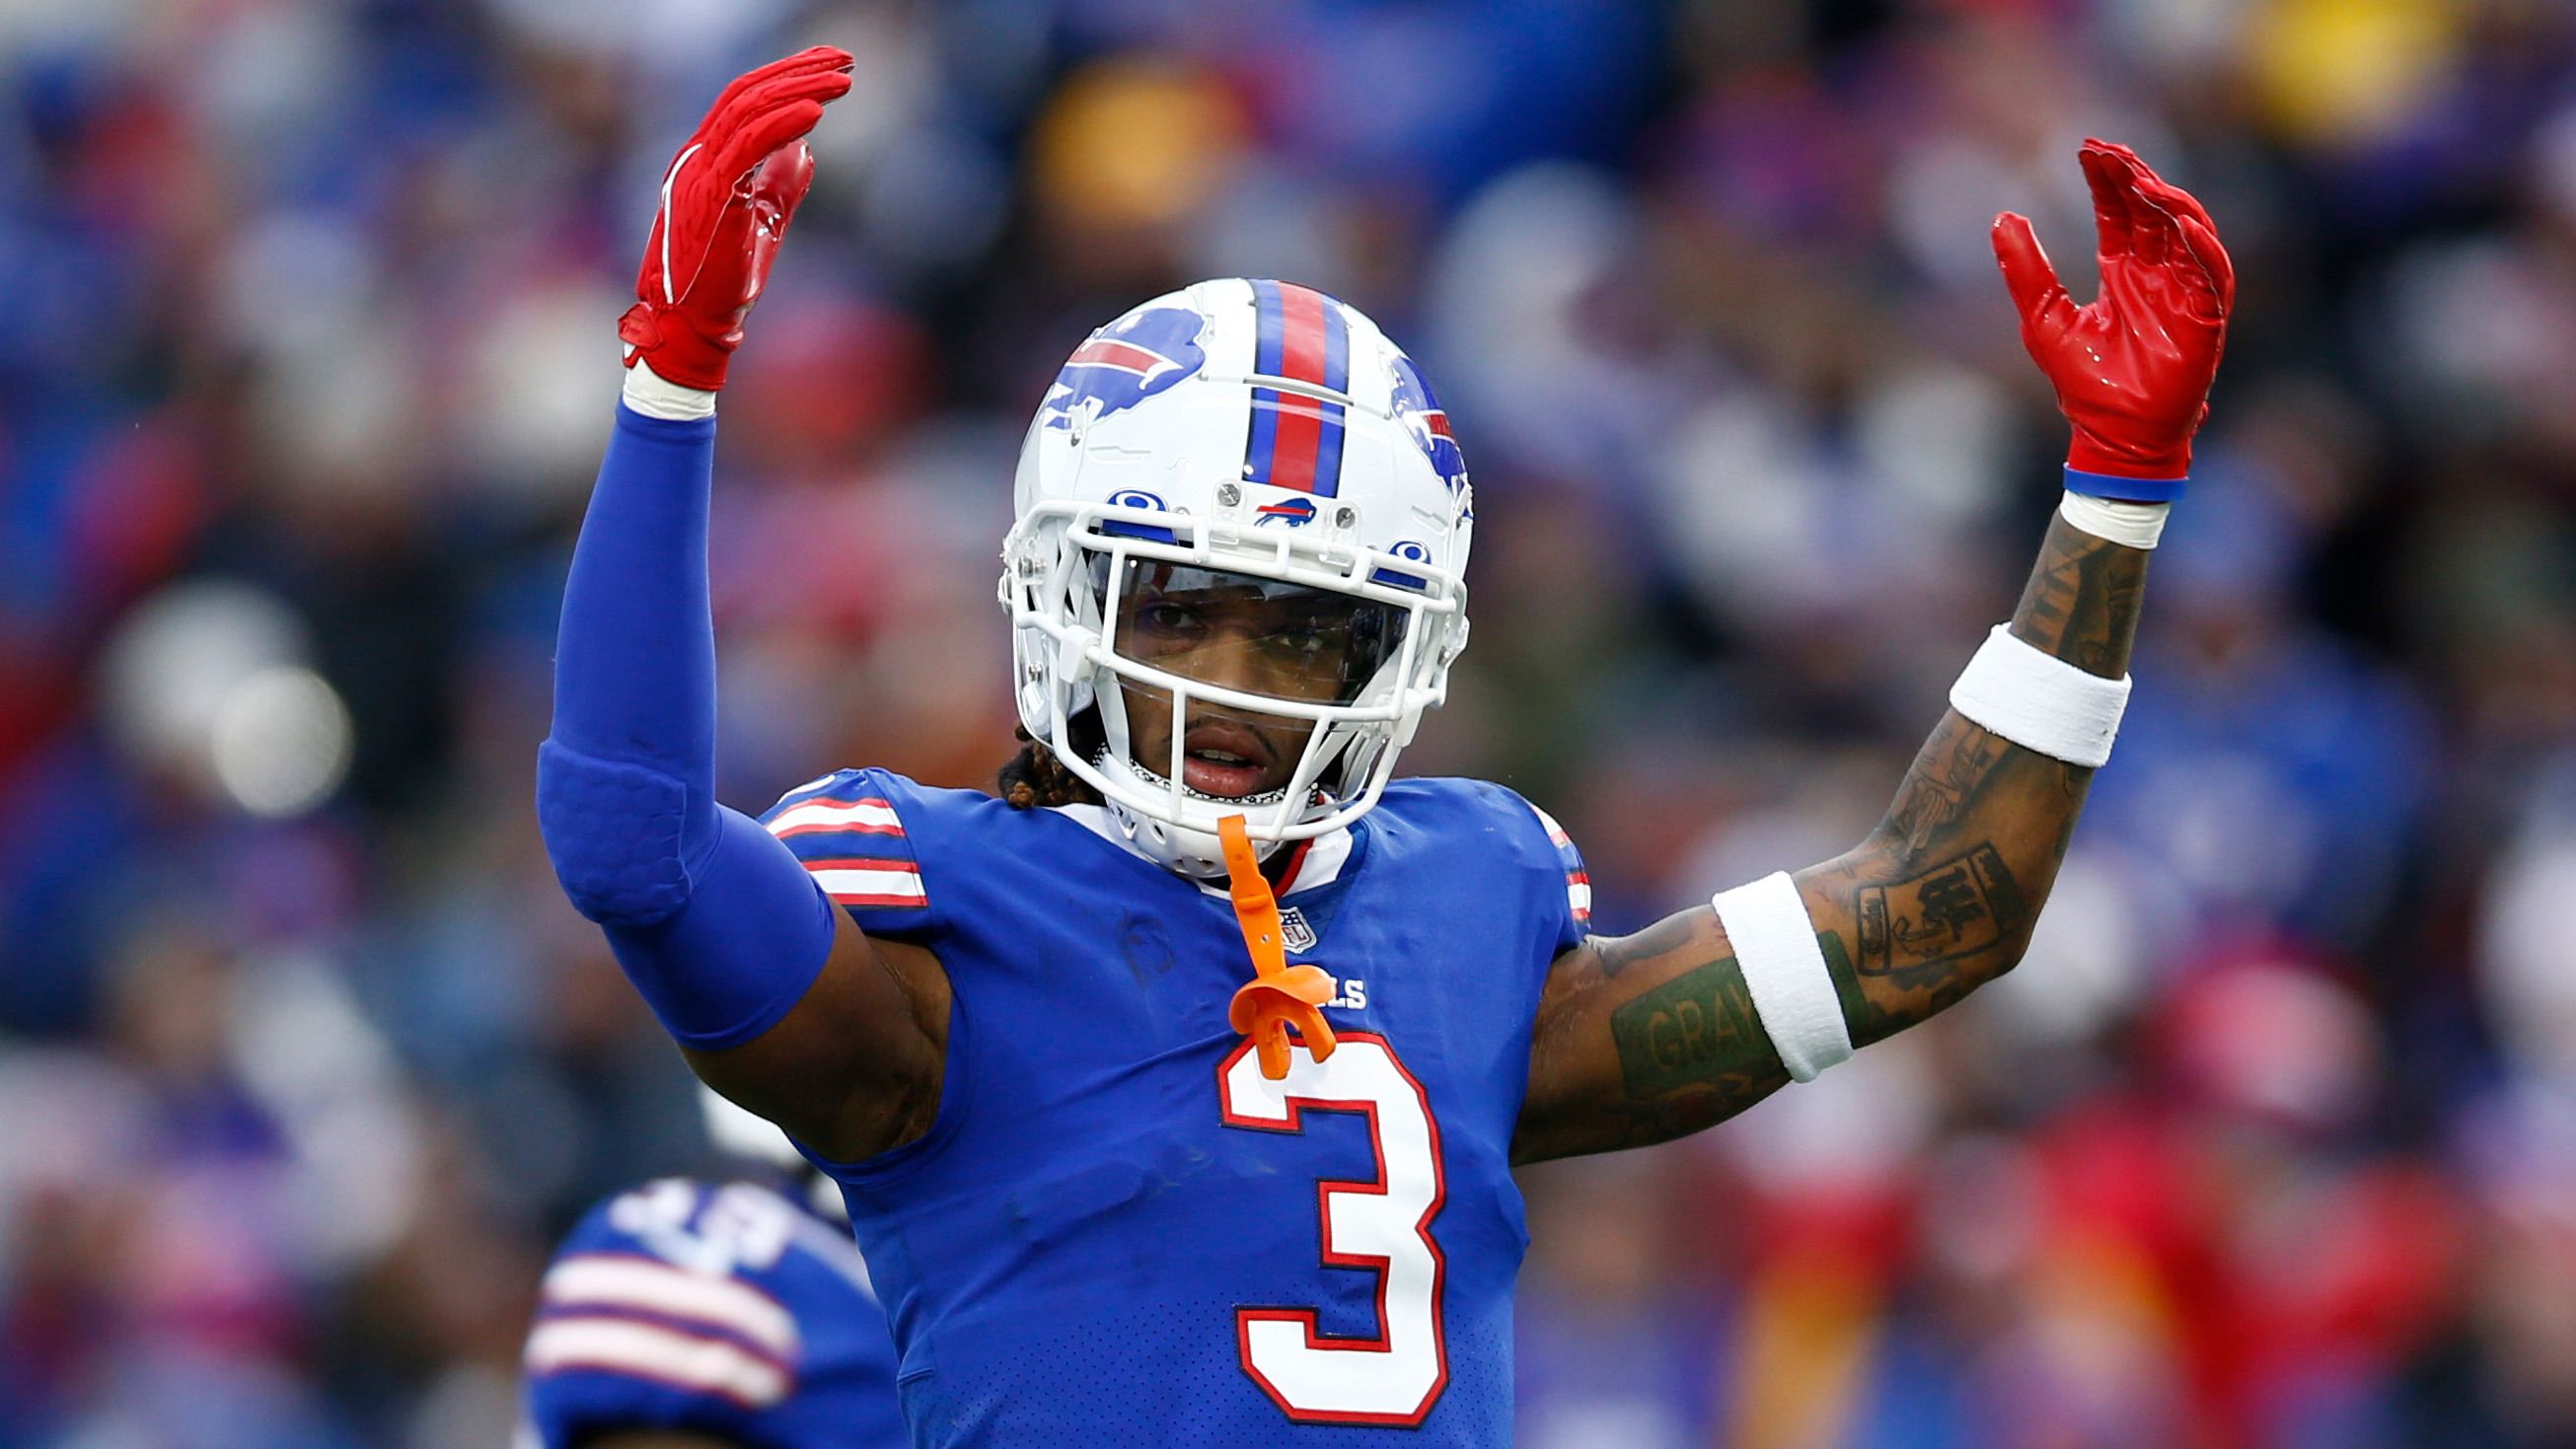 Damar Hamlin #3 of the Buffalo Bills gestures towards the crowd during the third quarter against the Minnesota Vikings at Highmark Stadium on November 13, 2022 in Orchard Park, New York. (Photo by Isaiah Vazquez/Getty Images)